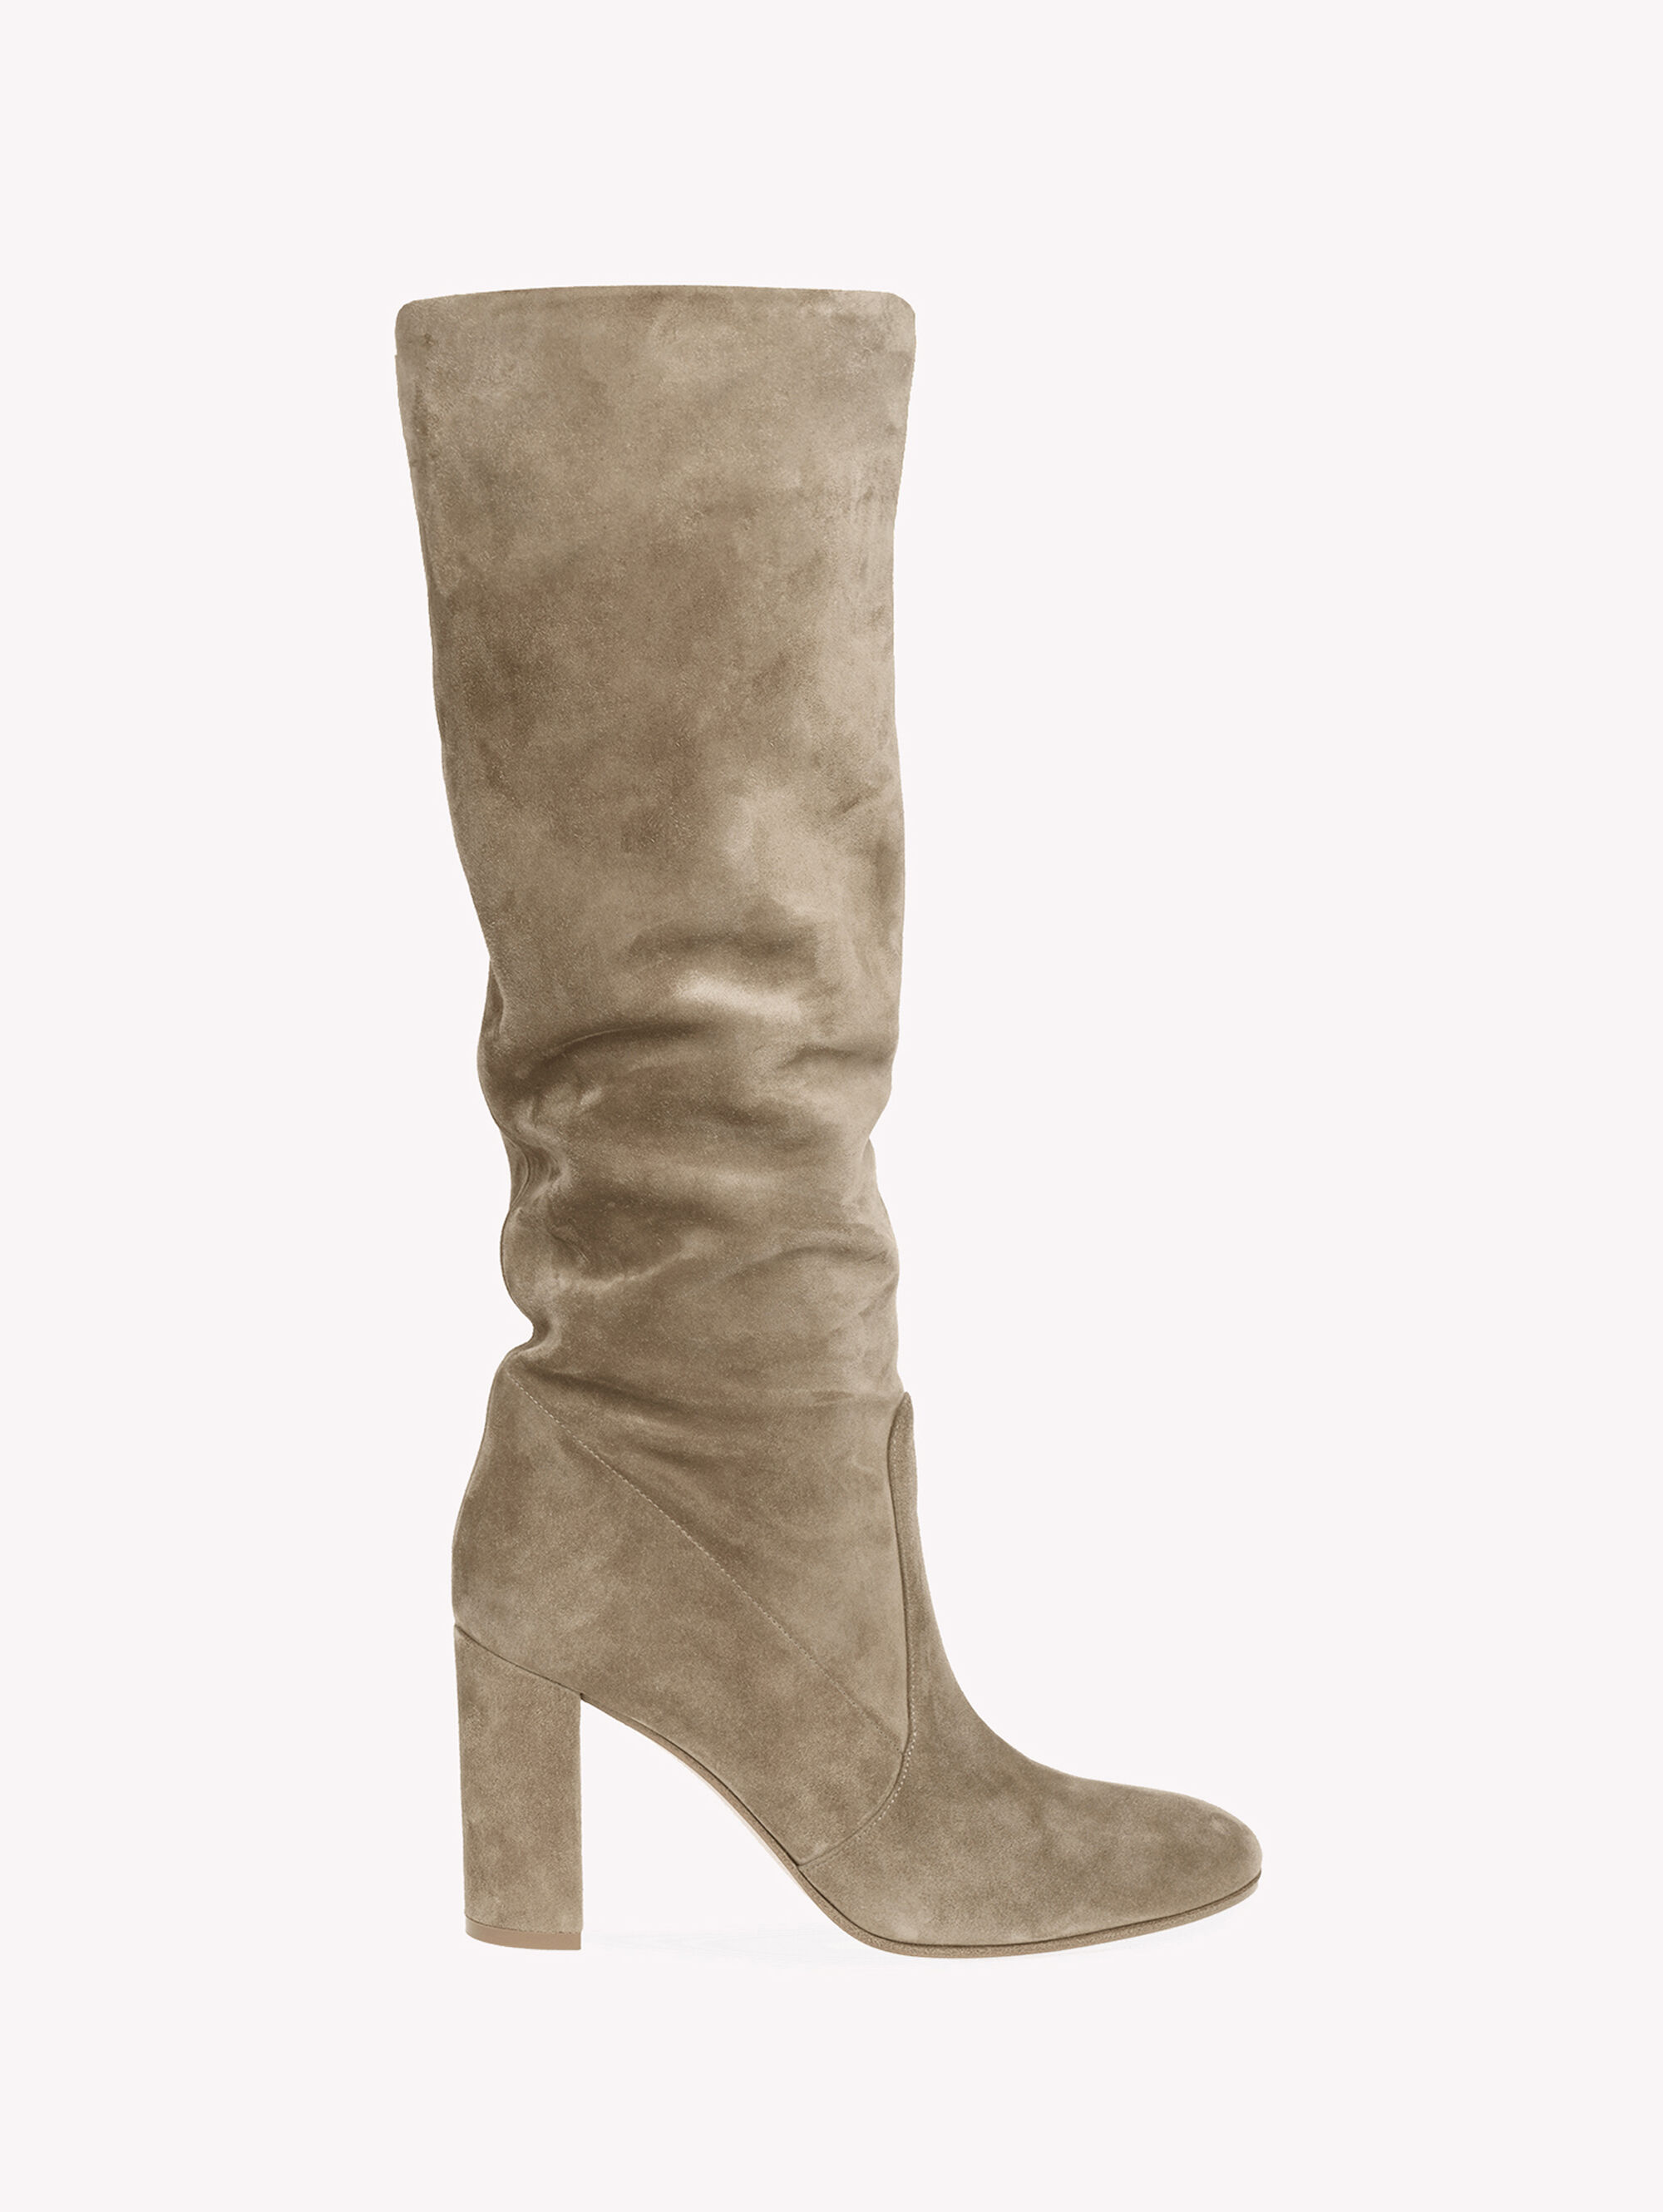 Luxury Boots for Women | Gianvito Rossi